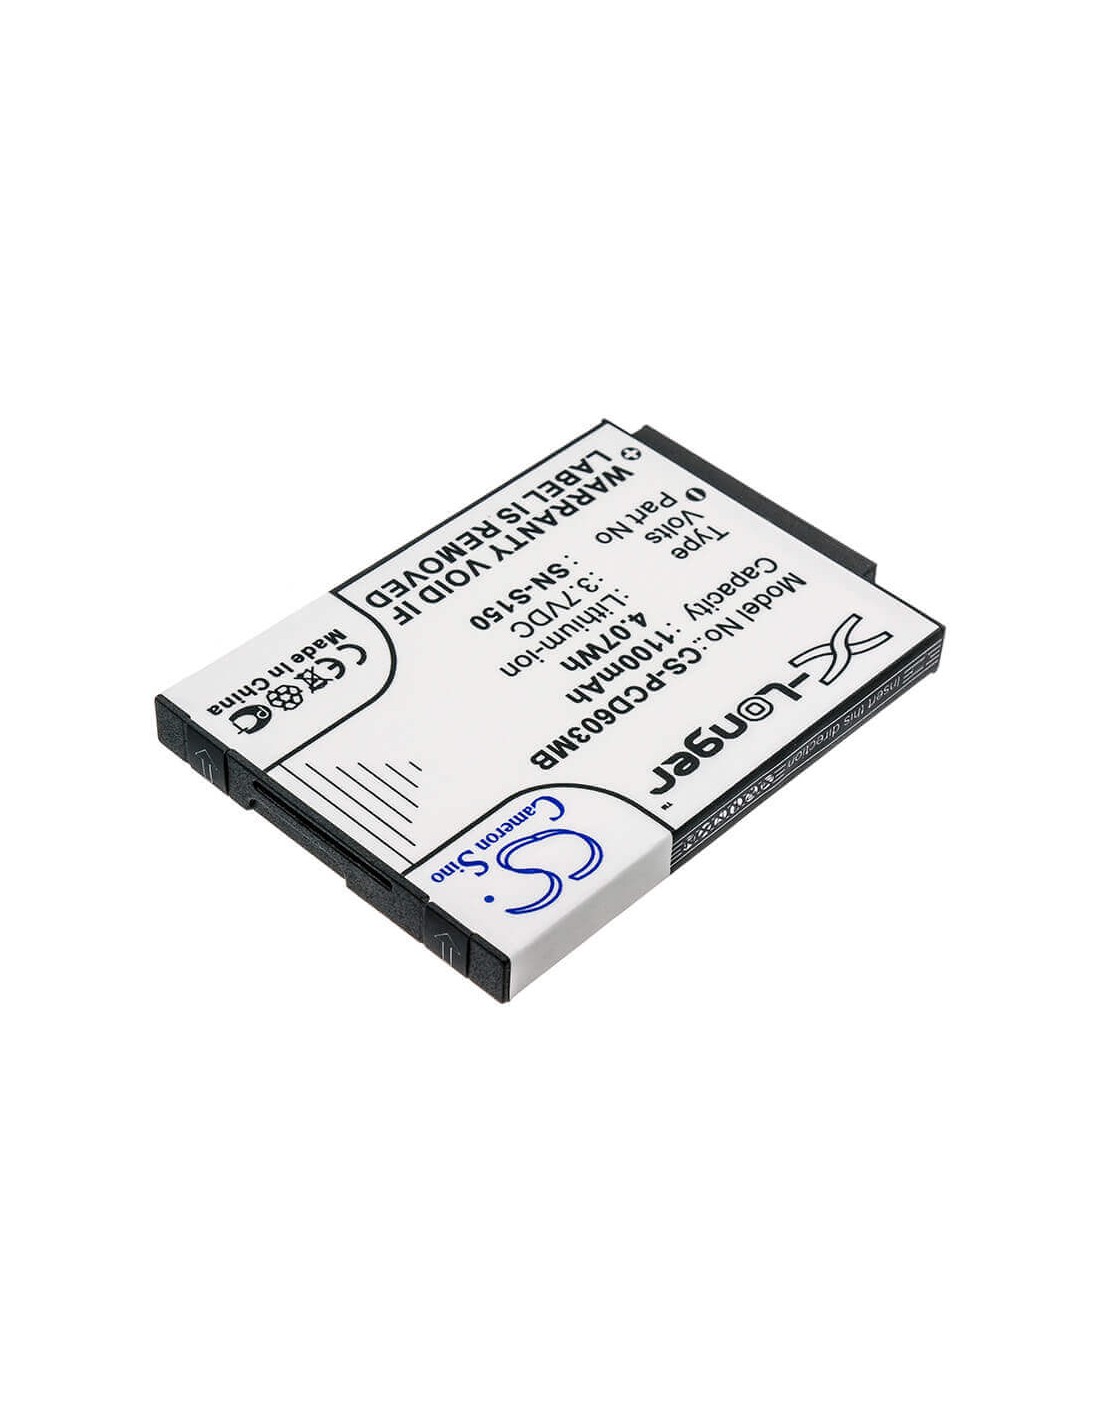 Battery for Philips, Scd603, Scd-603/00, Scd-603h 3.7V, 1100mAh - 4.07Wh